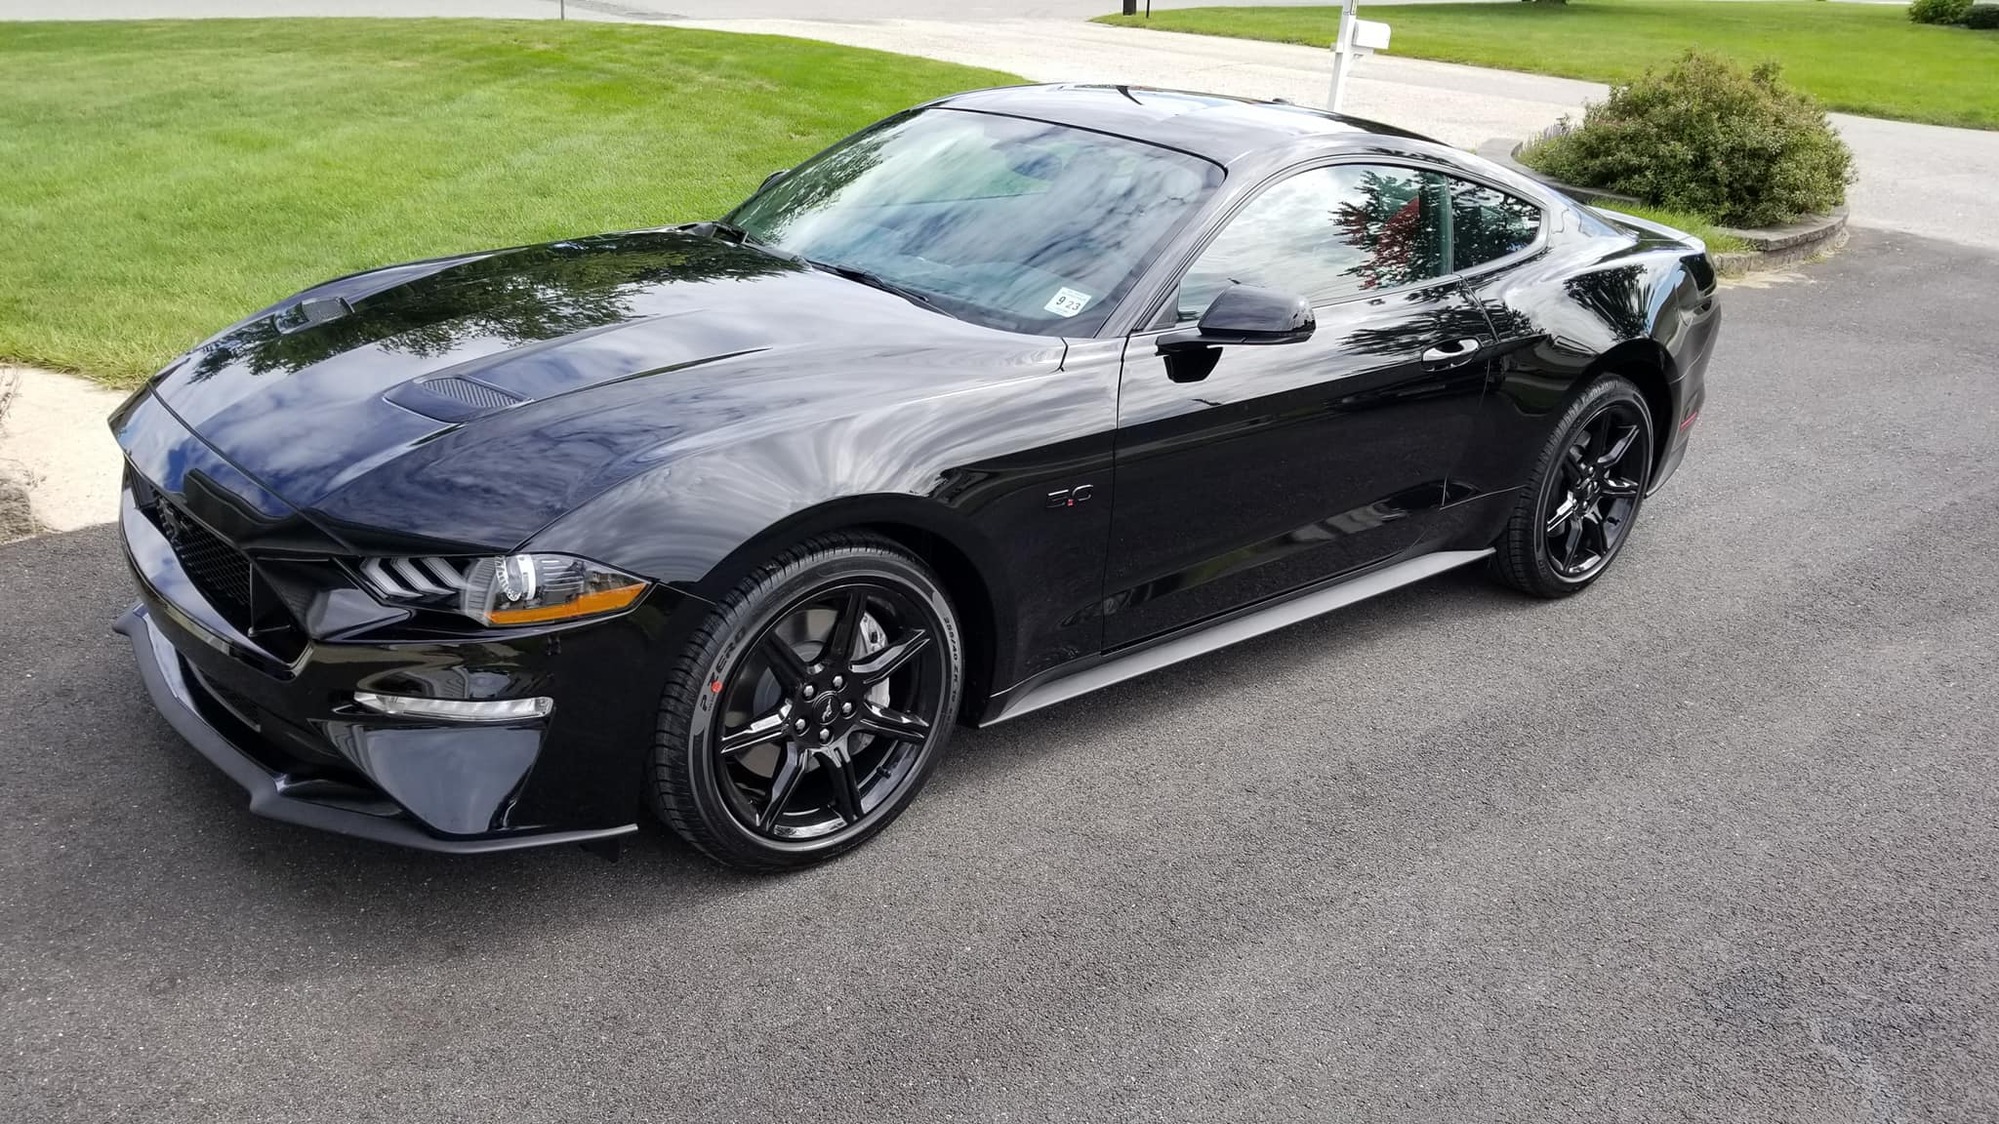 S650 Mustang Introduce Yourself to Mustang7G! 2019 MUSTANG GT